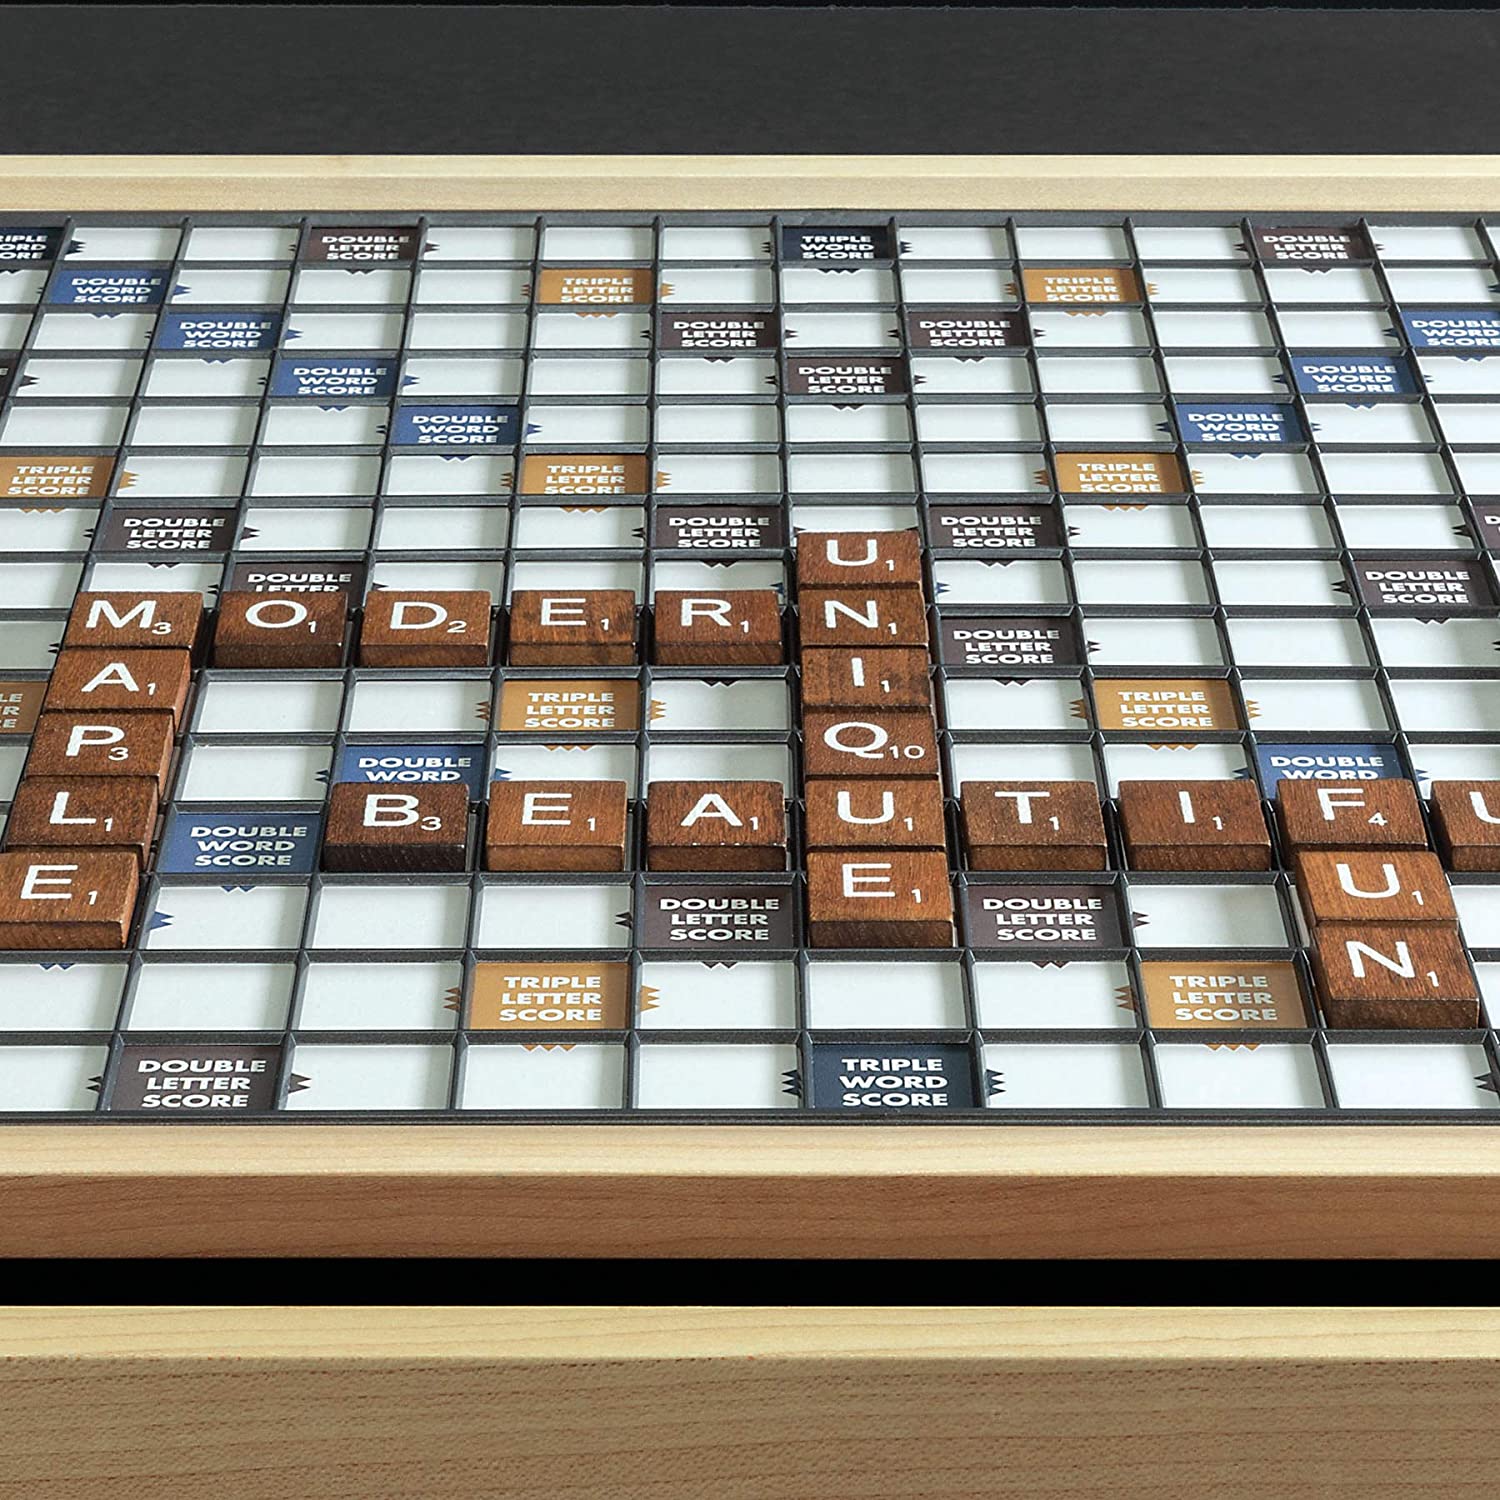 A close view of the board from the luxury maple wood edition of Scrabble.